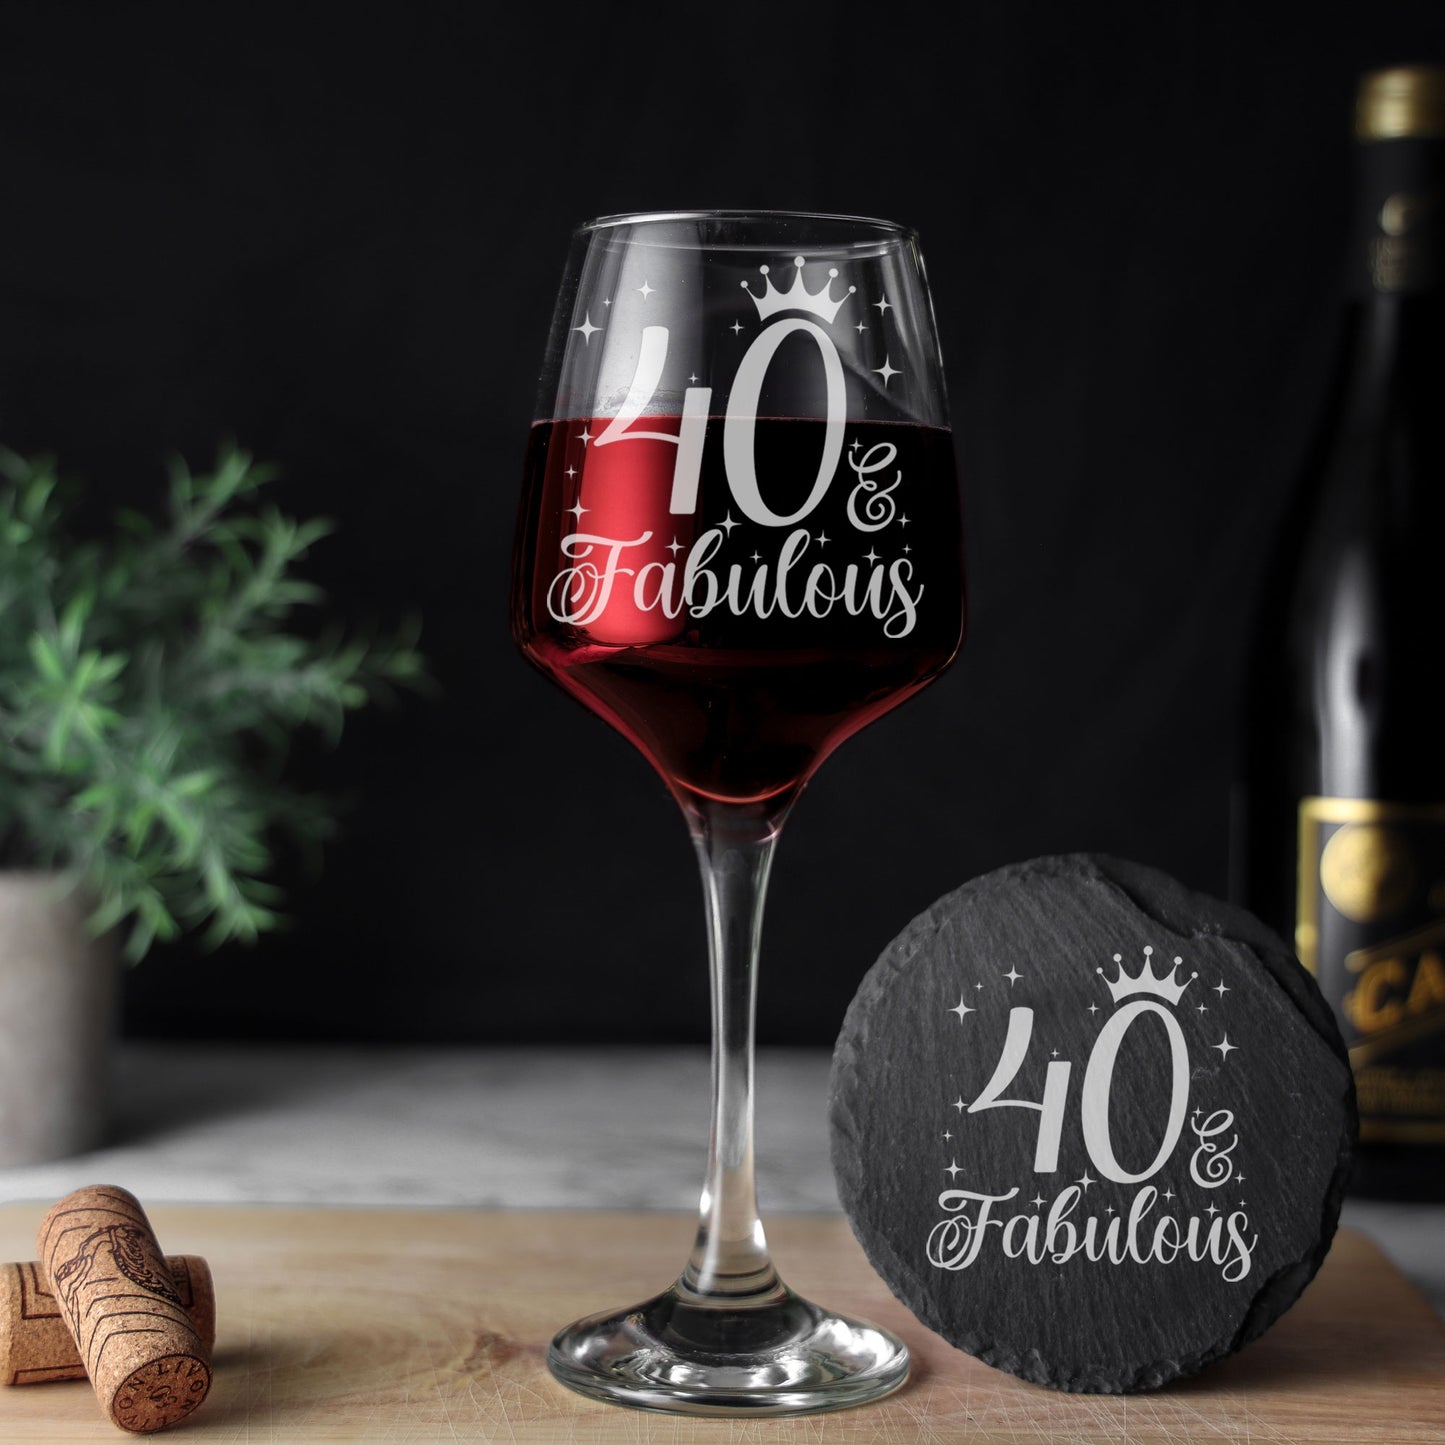 40 & Fabulous 40th Birthday Gift Engraved Wine Glass and/or Coaster Set  - Always Looking Good - Glass & Round Coaster  